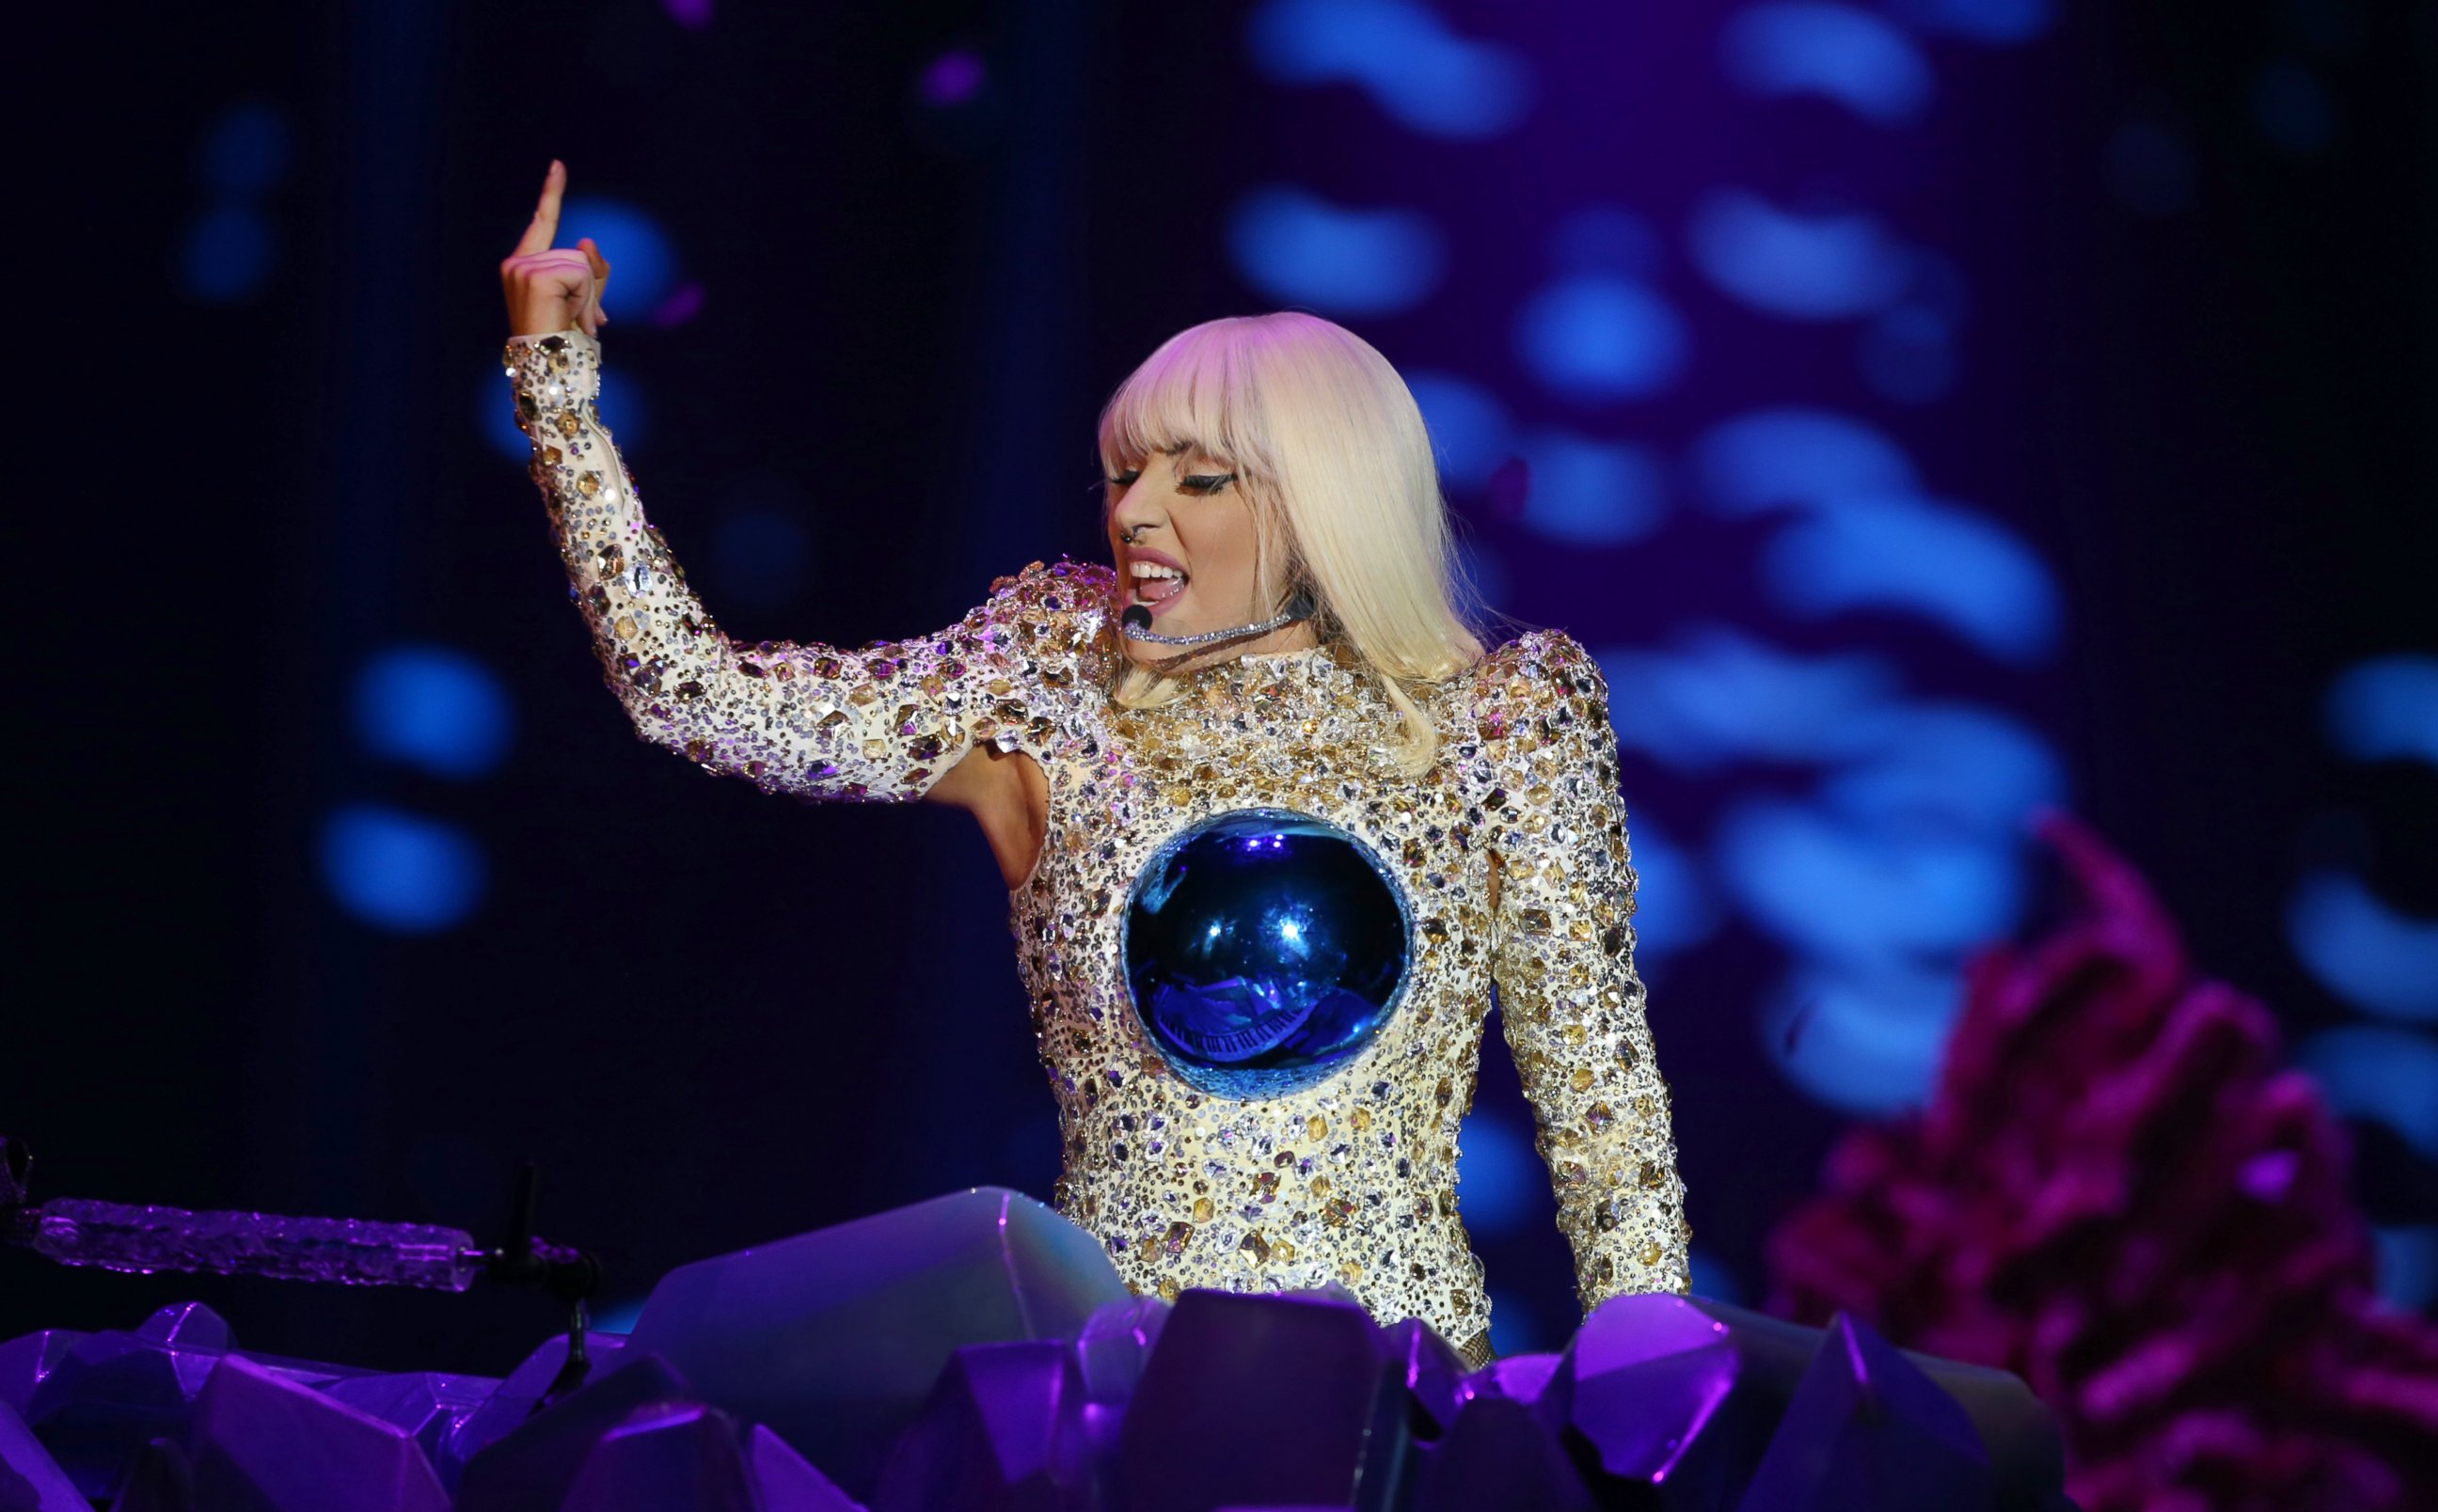 PHOTO: Lady Gaga performs on stage during the "artRave: The Artpop Ball" Tour at Perth Arena, Aug. 20, 2014, in Perth, Australia.